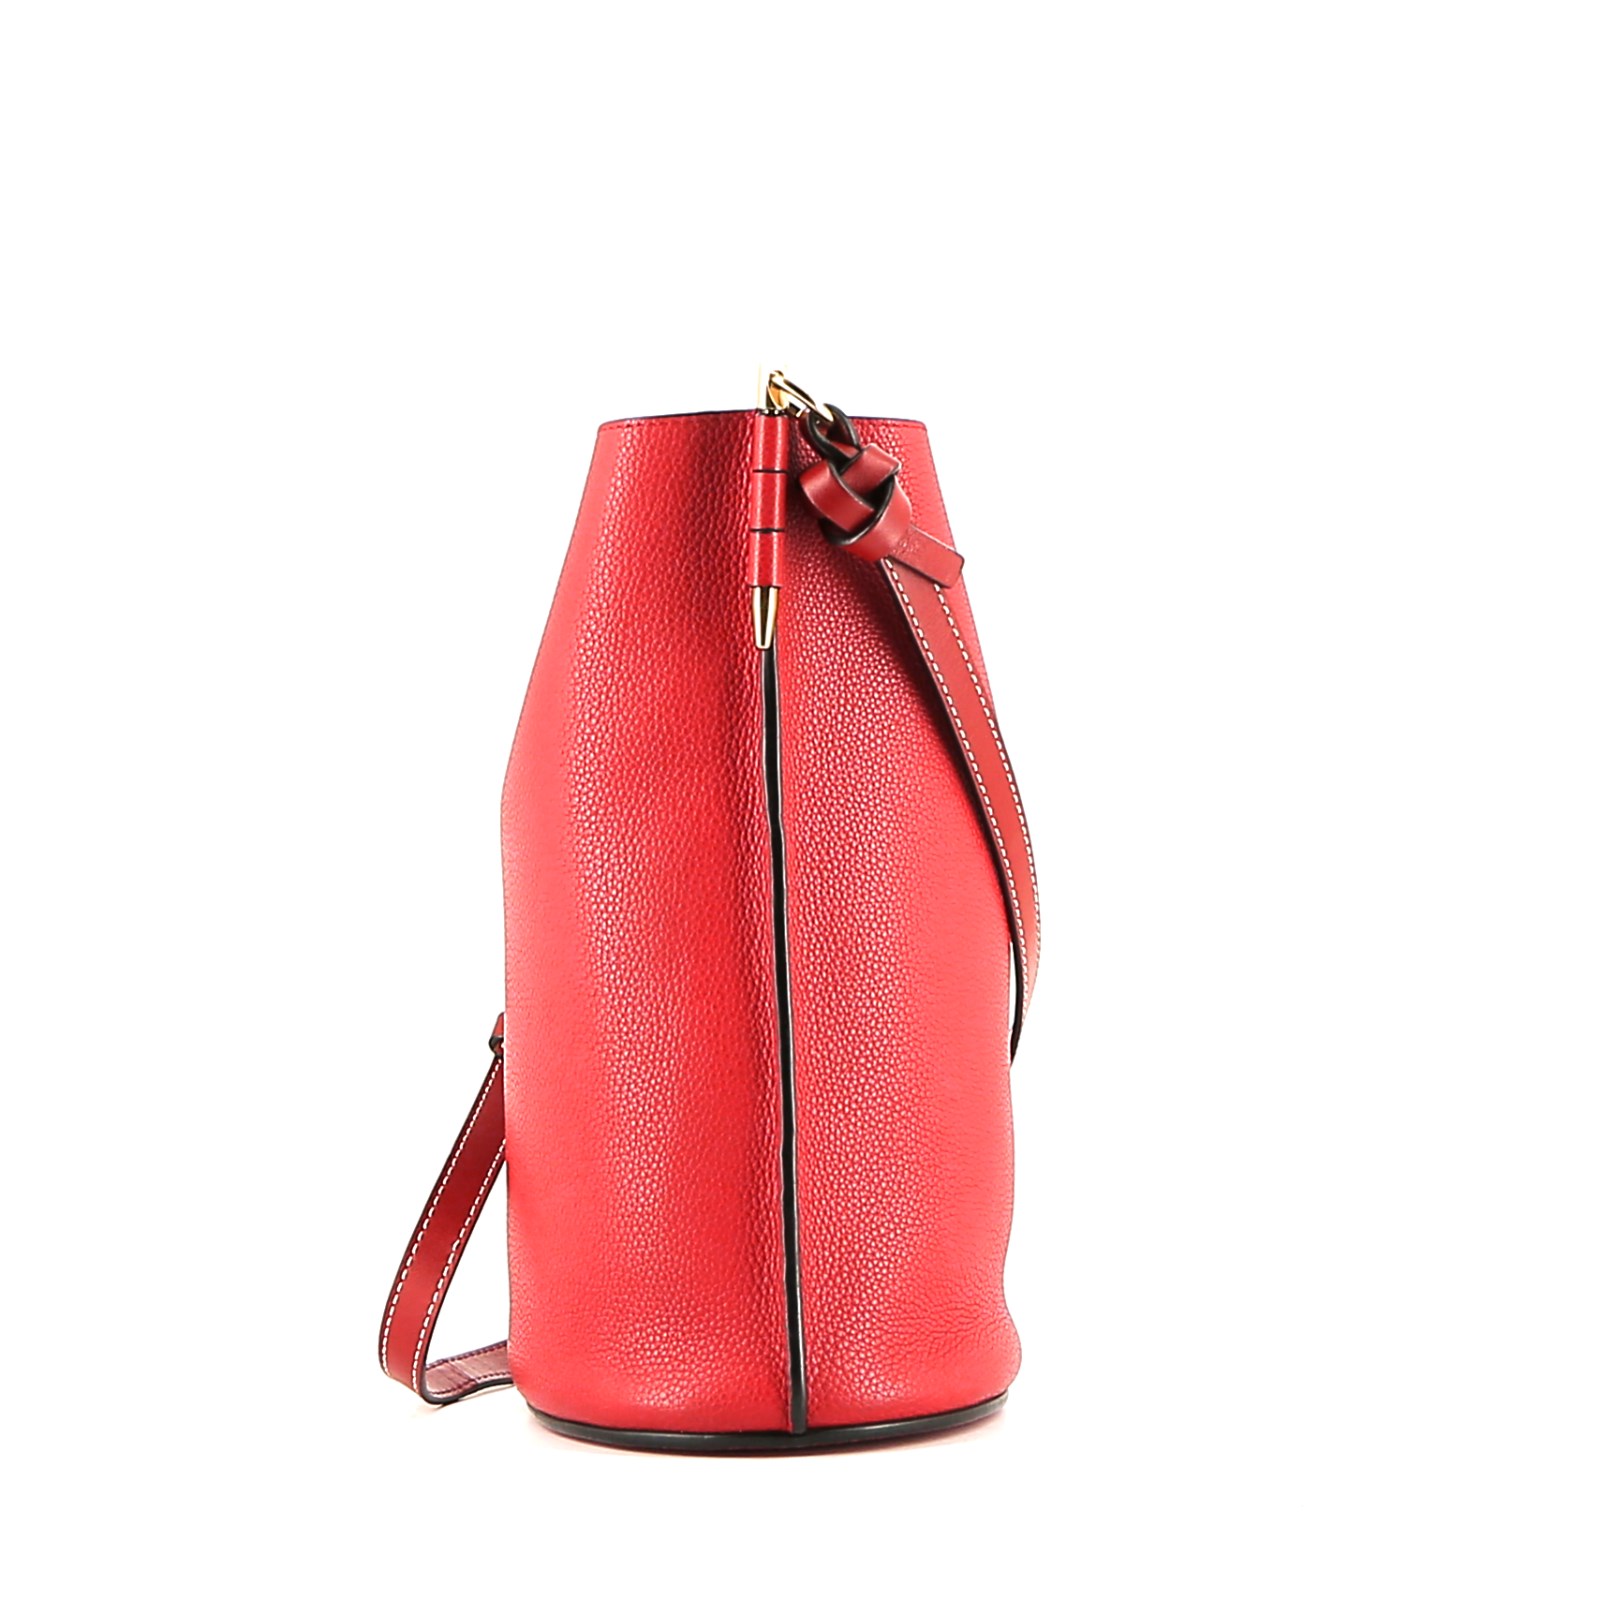 Gate Bag In Red Grained Leather